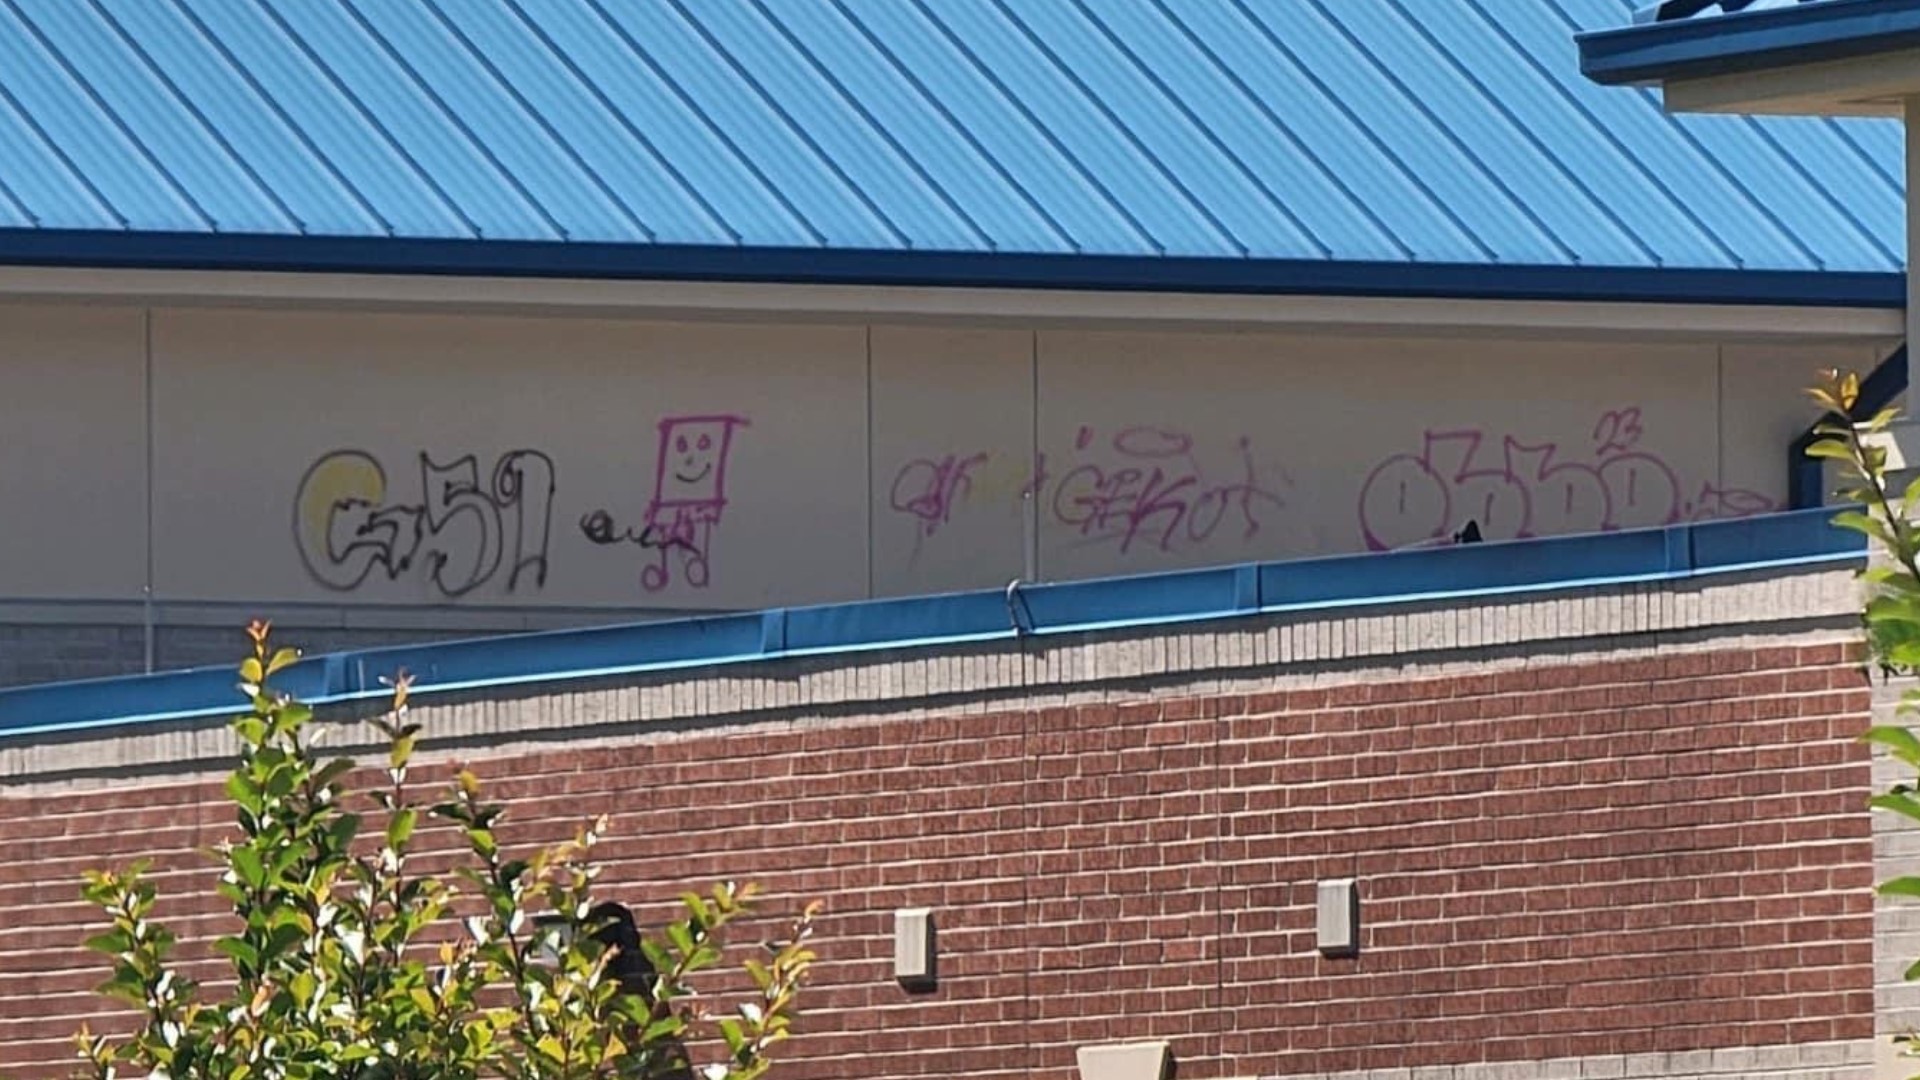 The graffiti was discovered by a teacher Saturday morning. A group of male suspects were seen on the school’s rooftop, but haven't been identified.